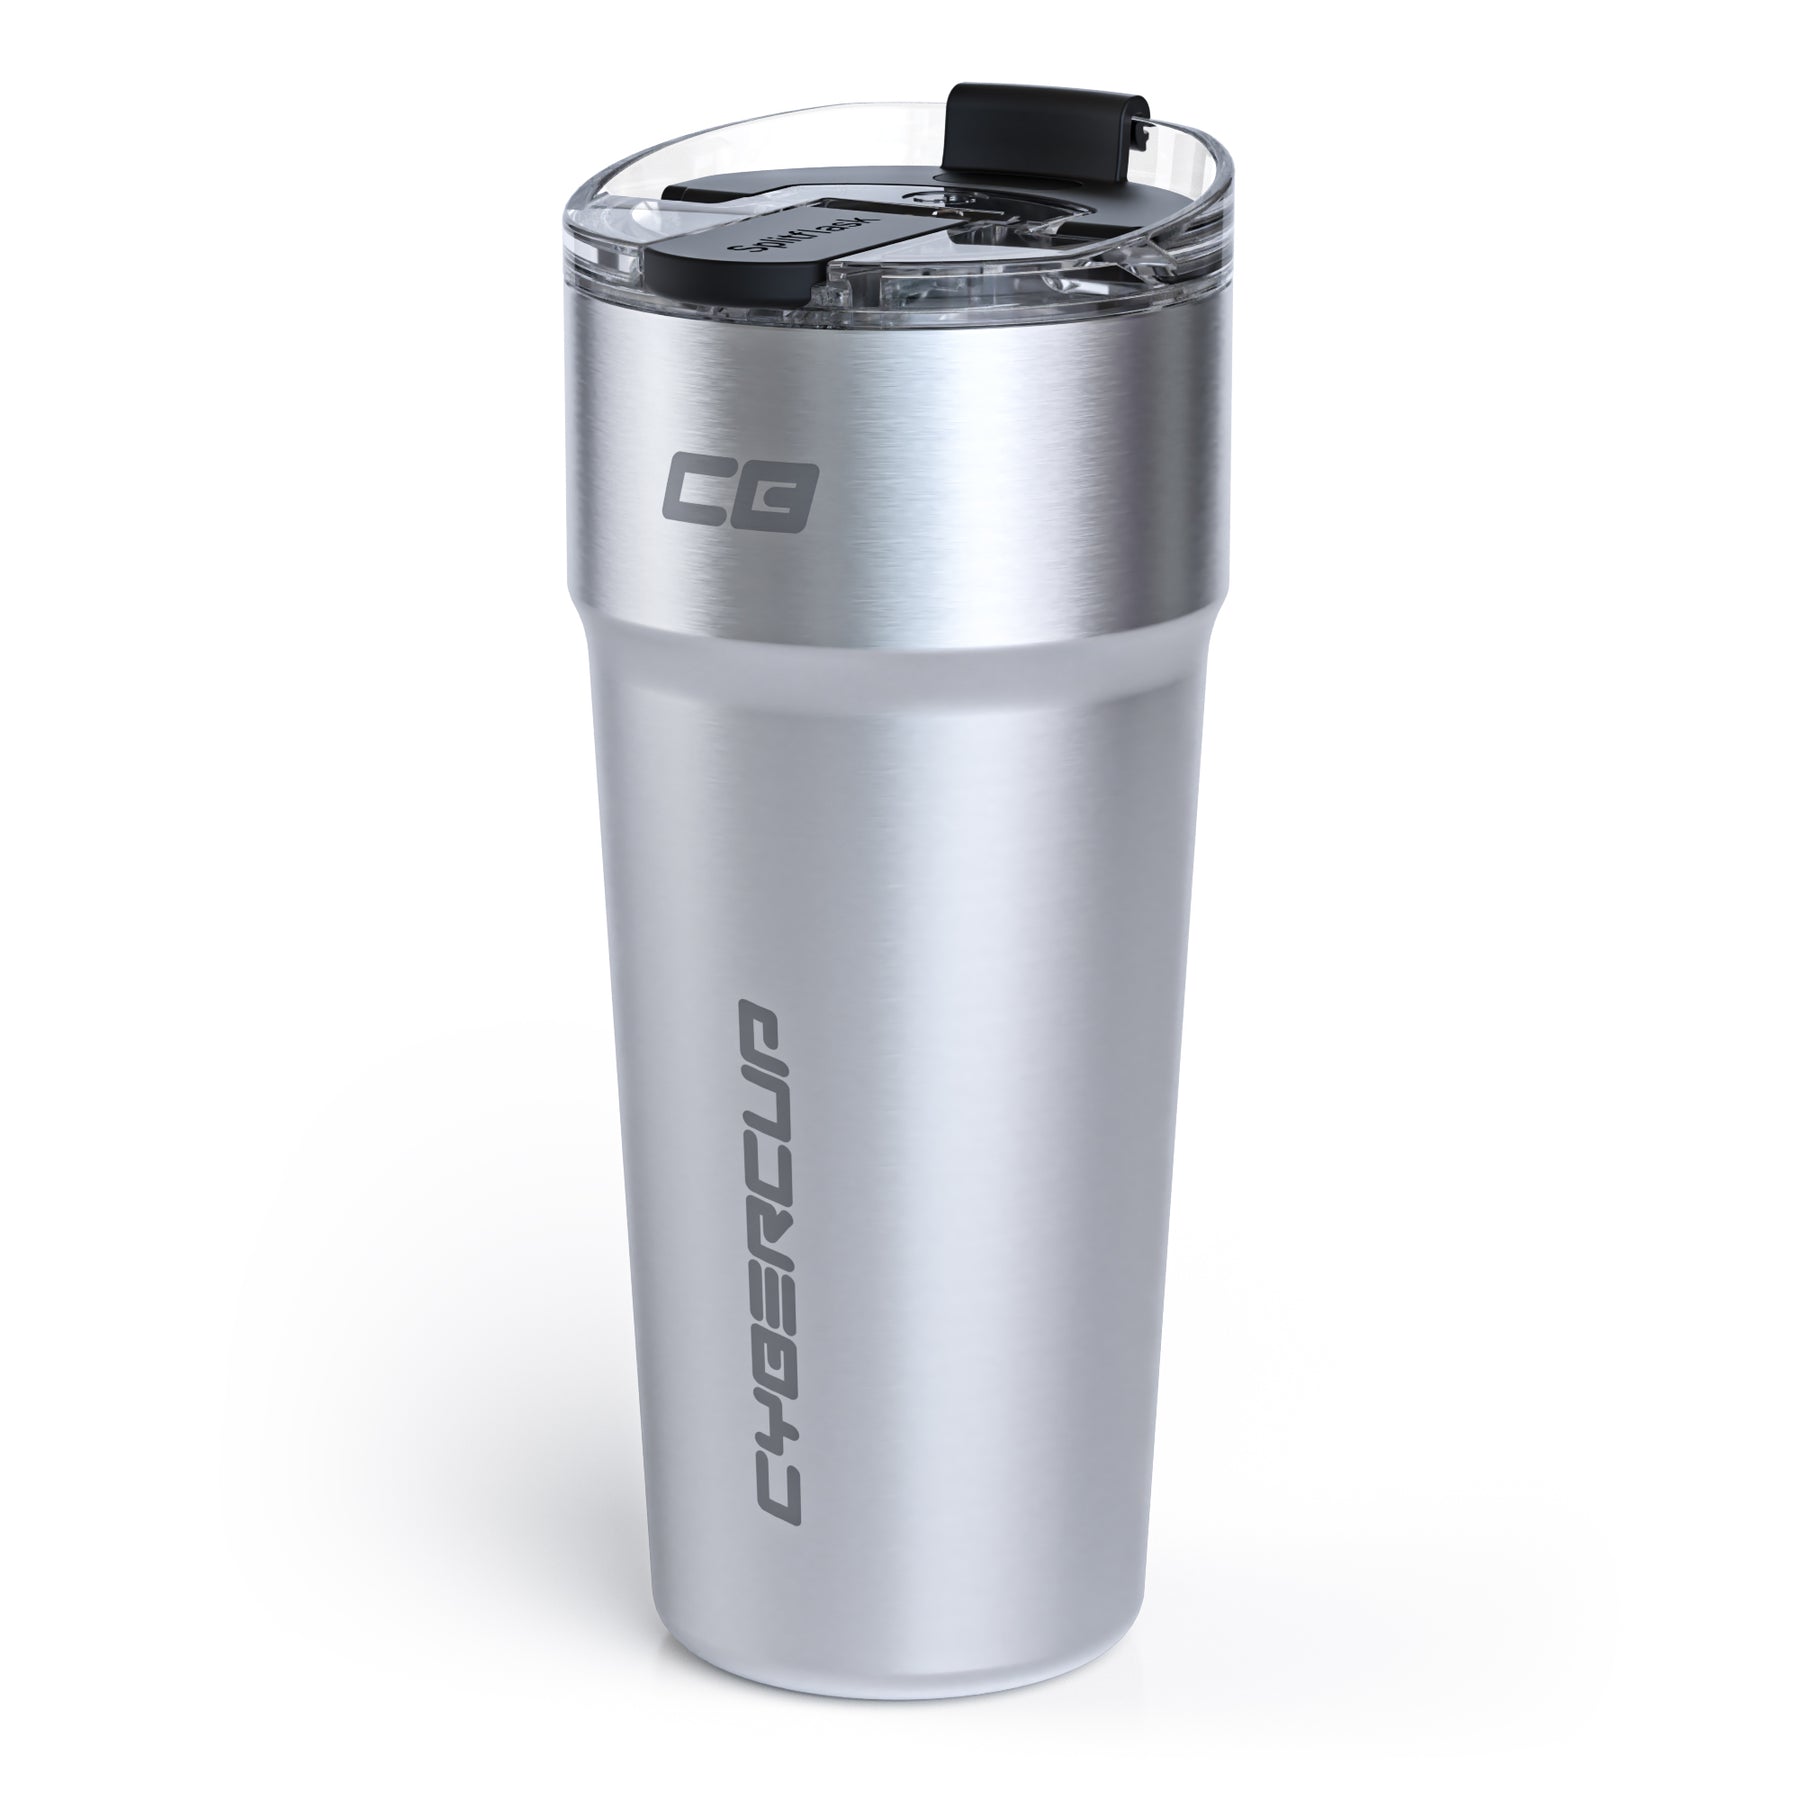 Cybercup 2 Drink Tumbler Cup